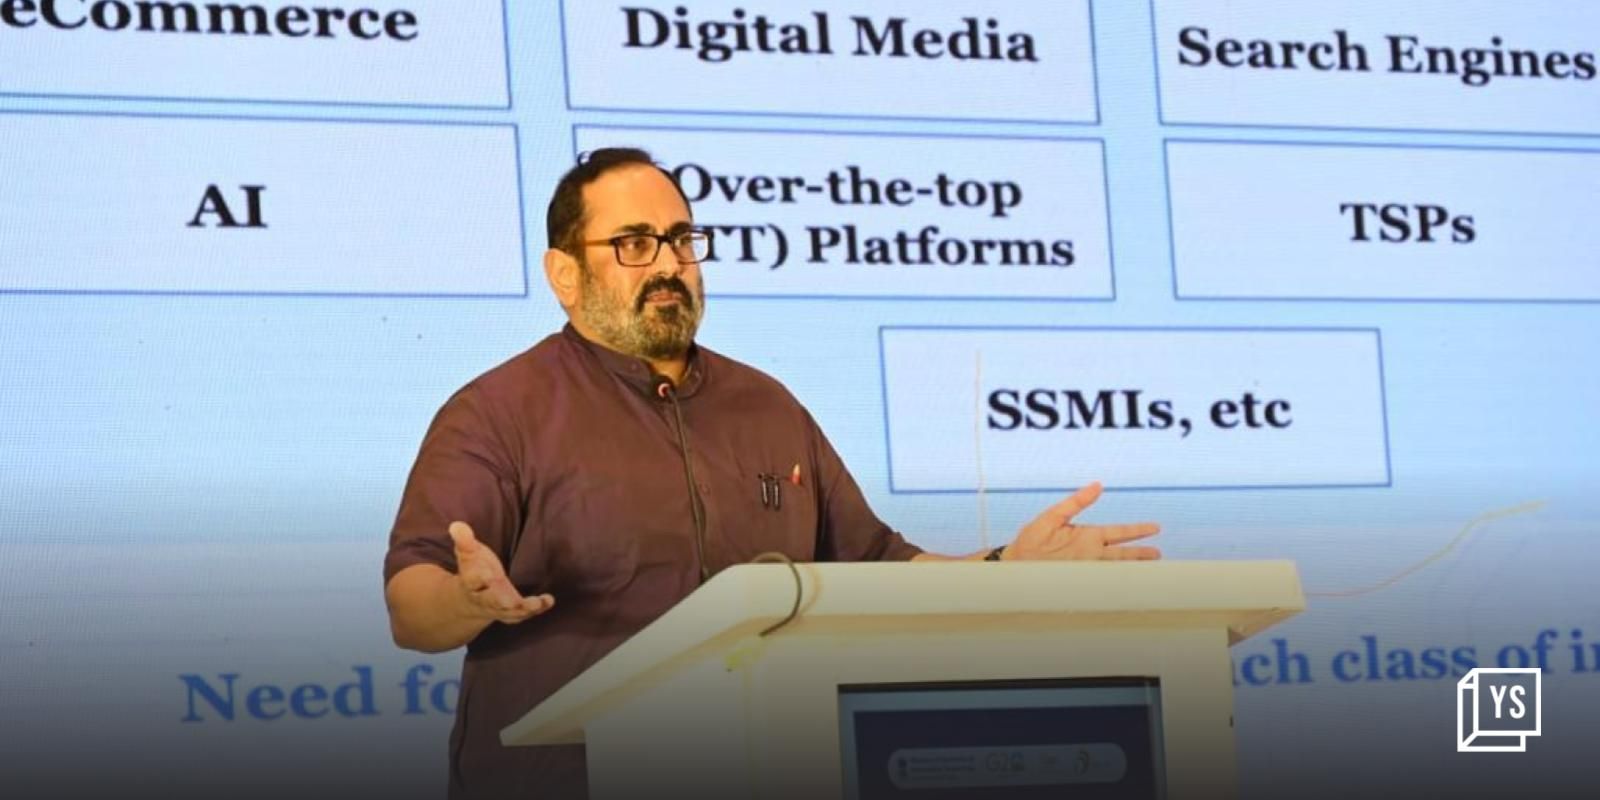 Digital India Act seeks to clarify which platforms will receive safe harbour protections: Rajeev Chandrasekhar